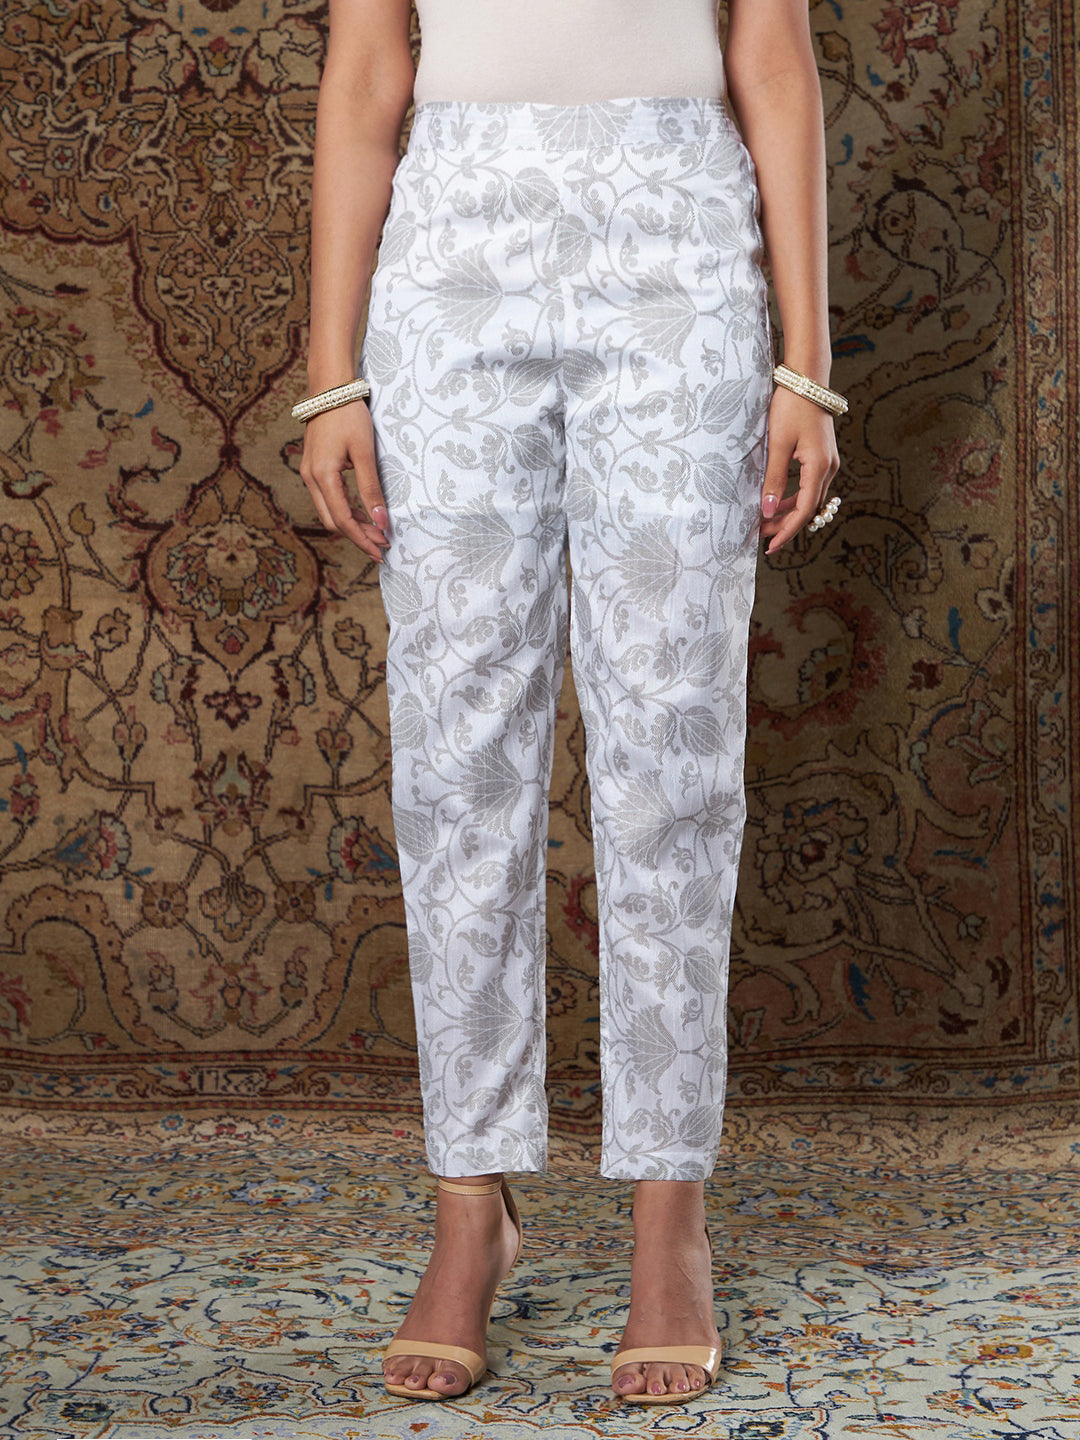 Buy Cream White Ankle Women Check Pant Brocade Silk for Best Price,  Reviews, Free Shipping